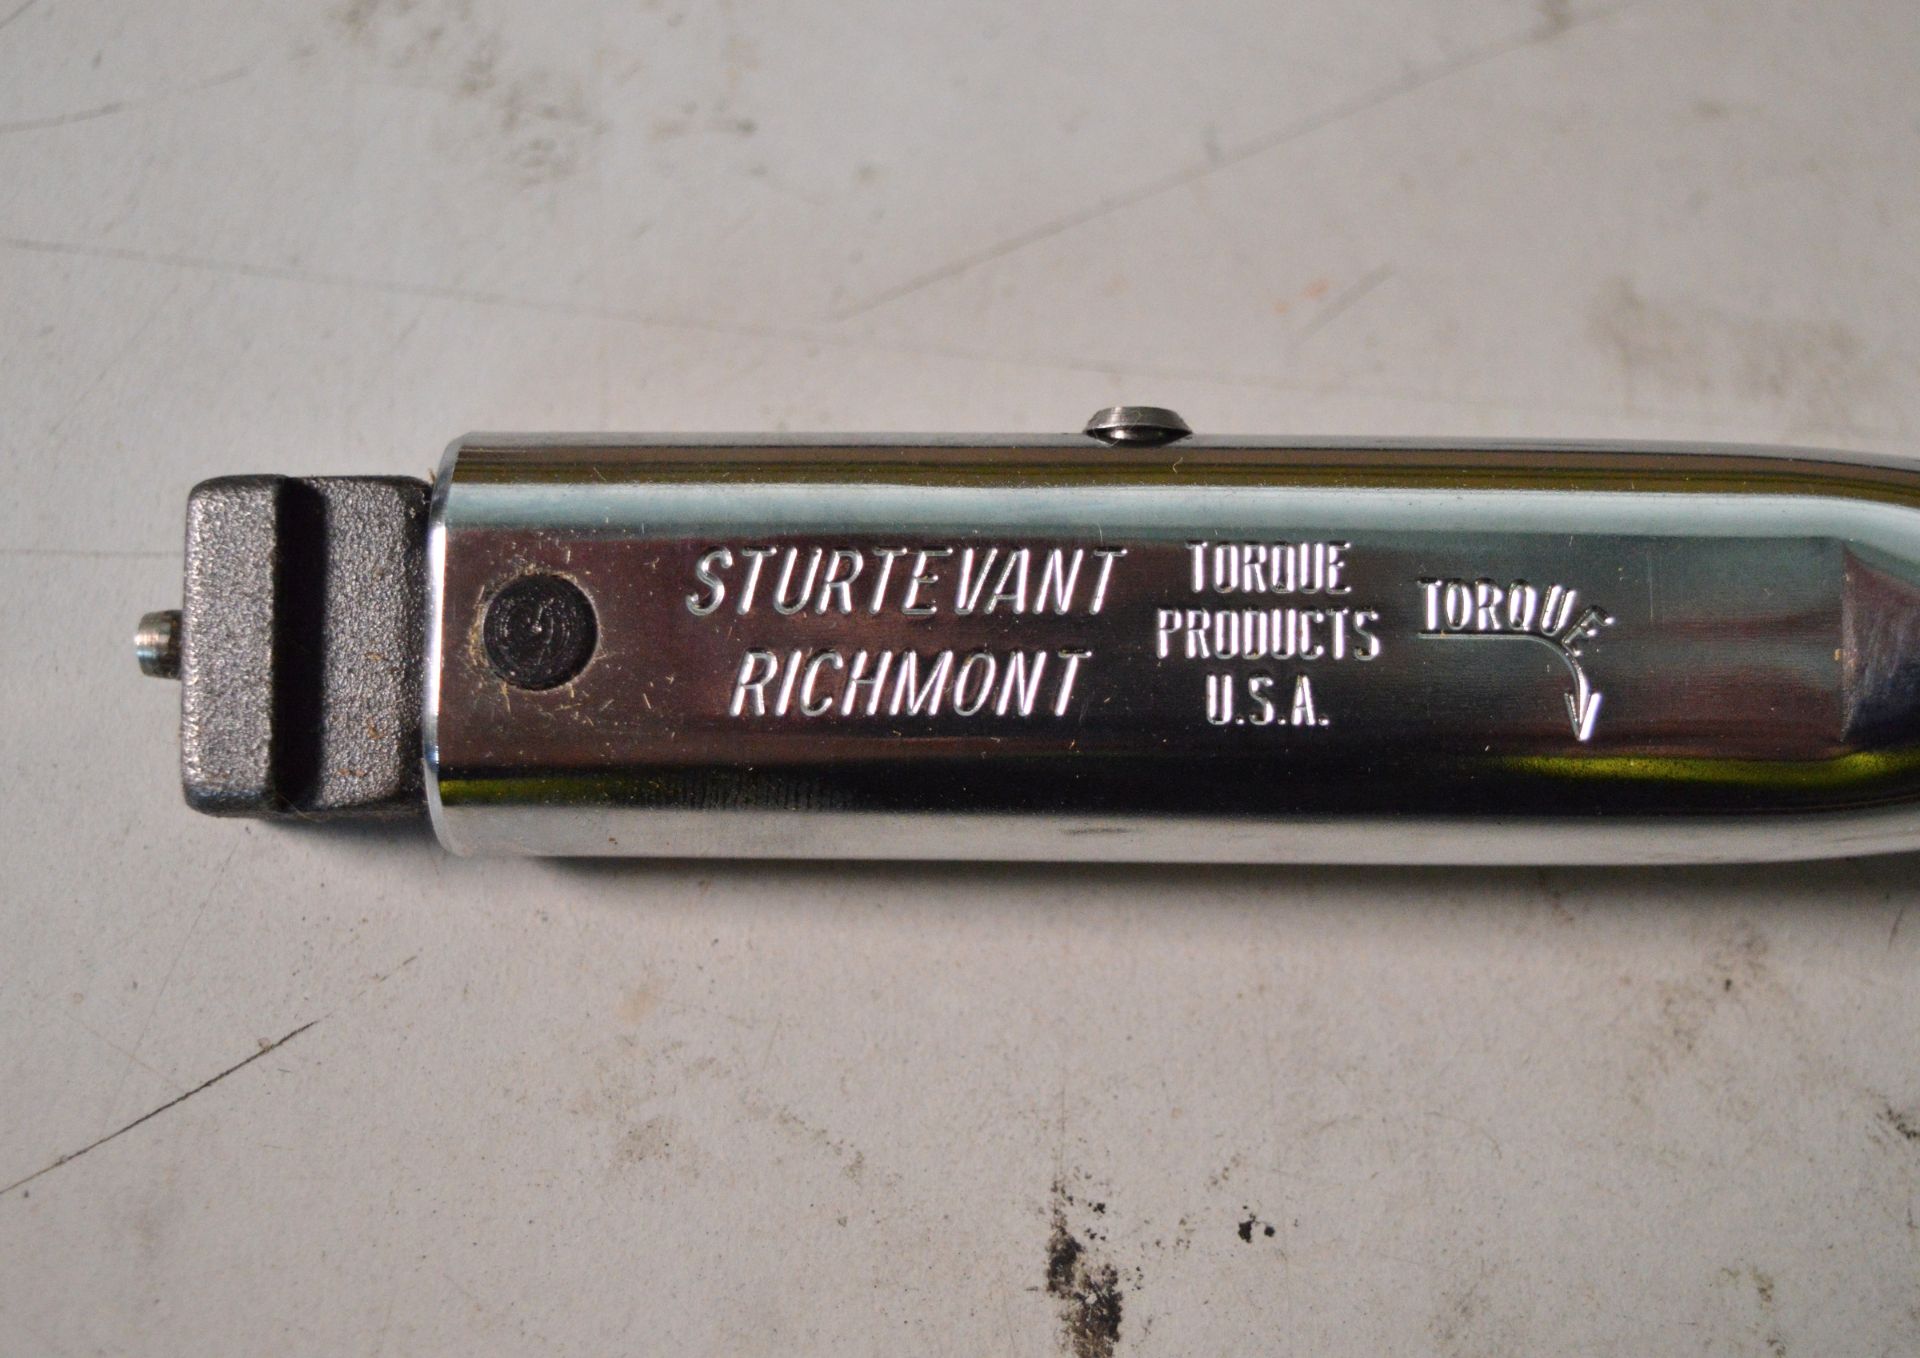 Sturtevant Richmont CCM 1501 Wrench Torque 30-150 lb in - Image 2 of 2